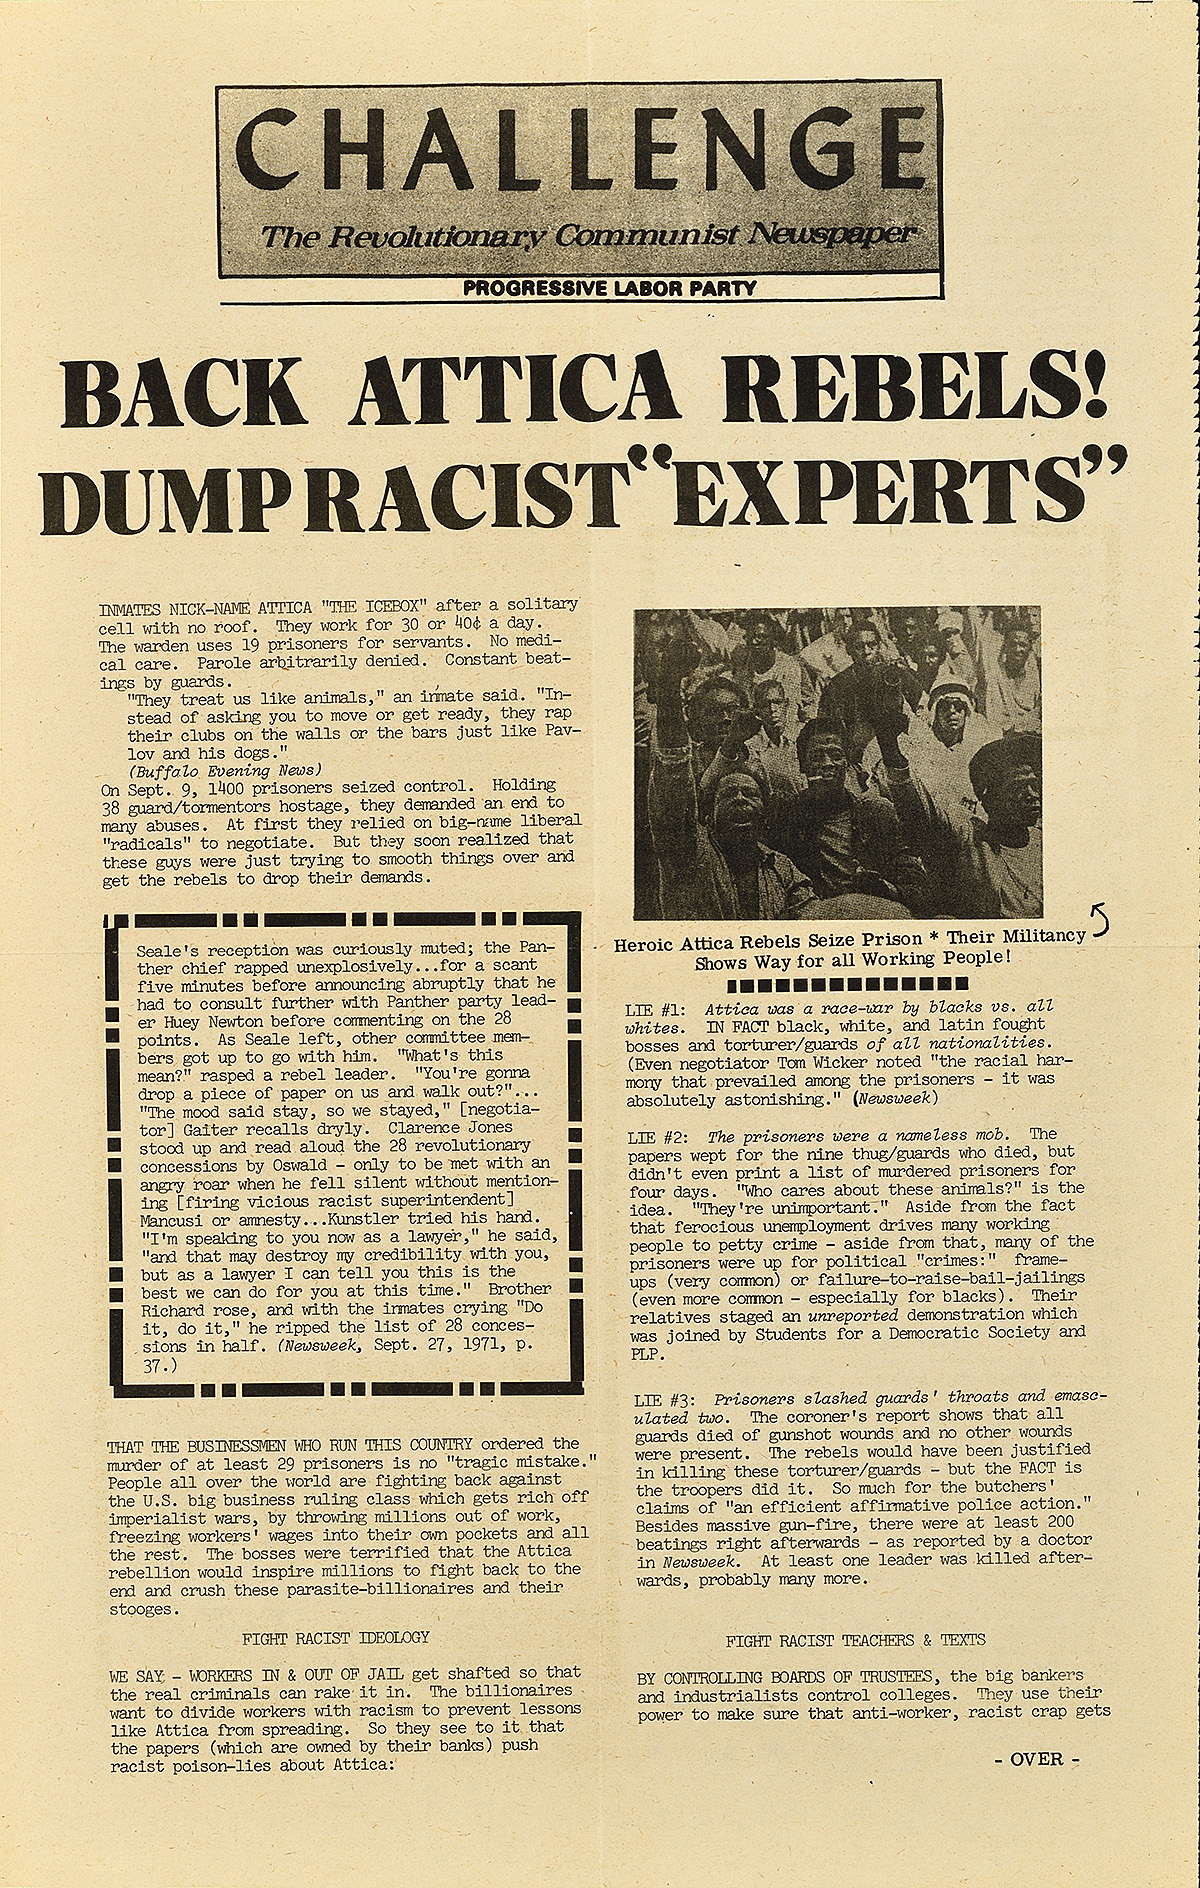 A newspaper article debunking Attica uprising lies with an image of a crowd of Black protesters.